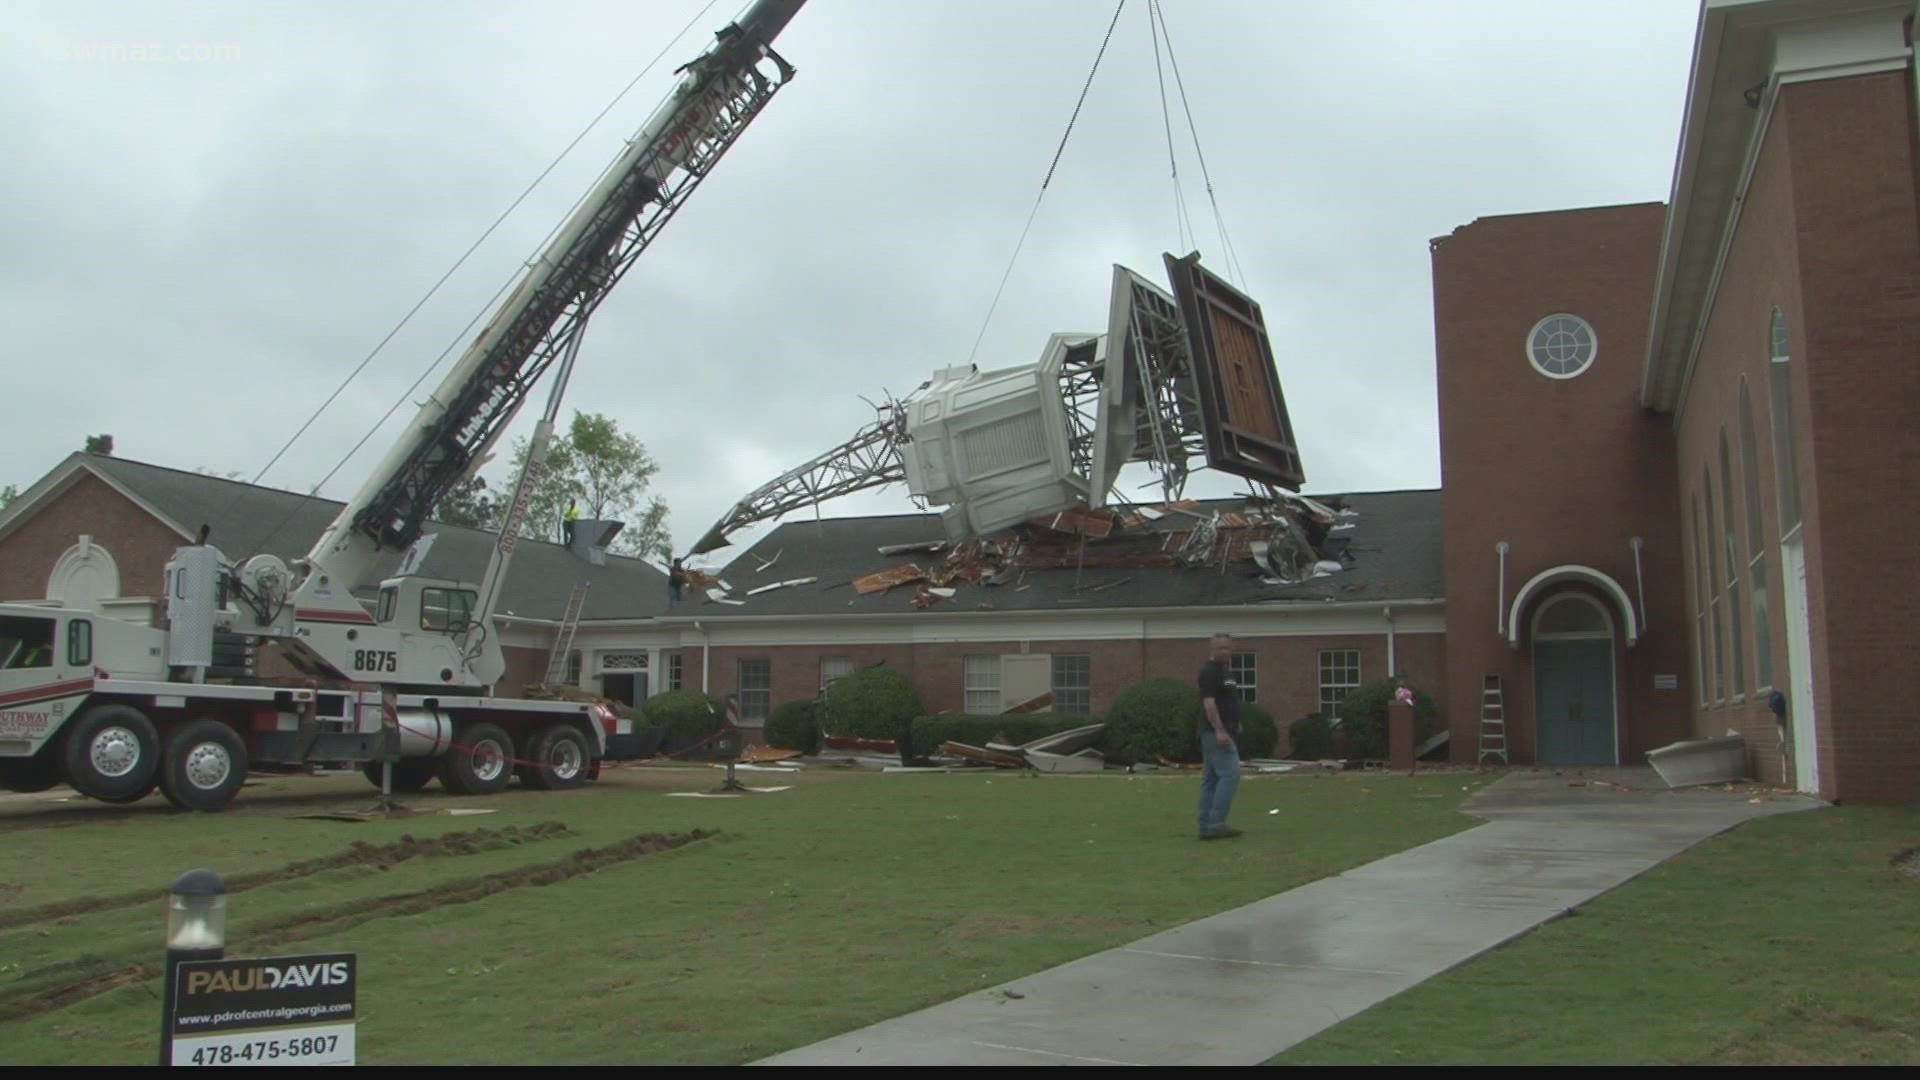 The steeple came down at Northminster Presbyterian Church in Tuesday's severe weather. People were inside hunkered down in a hallway but everyone is fine and made it